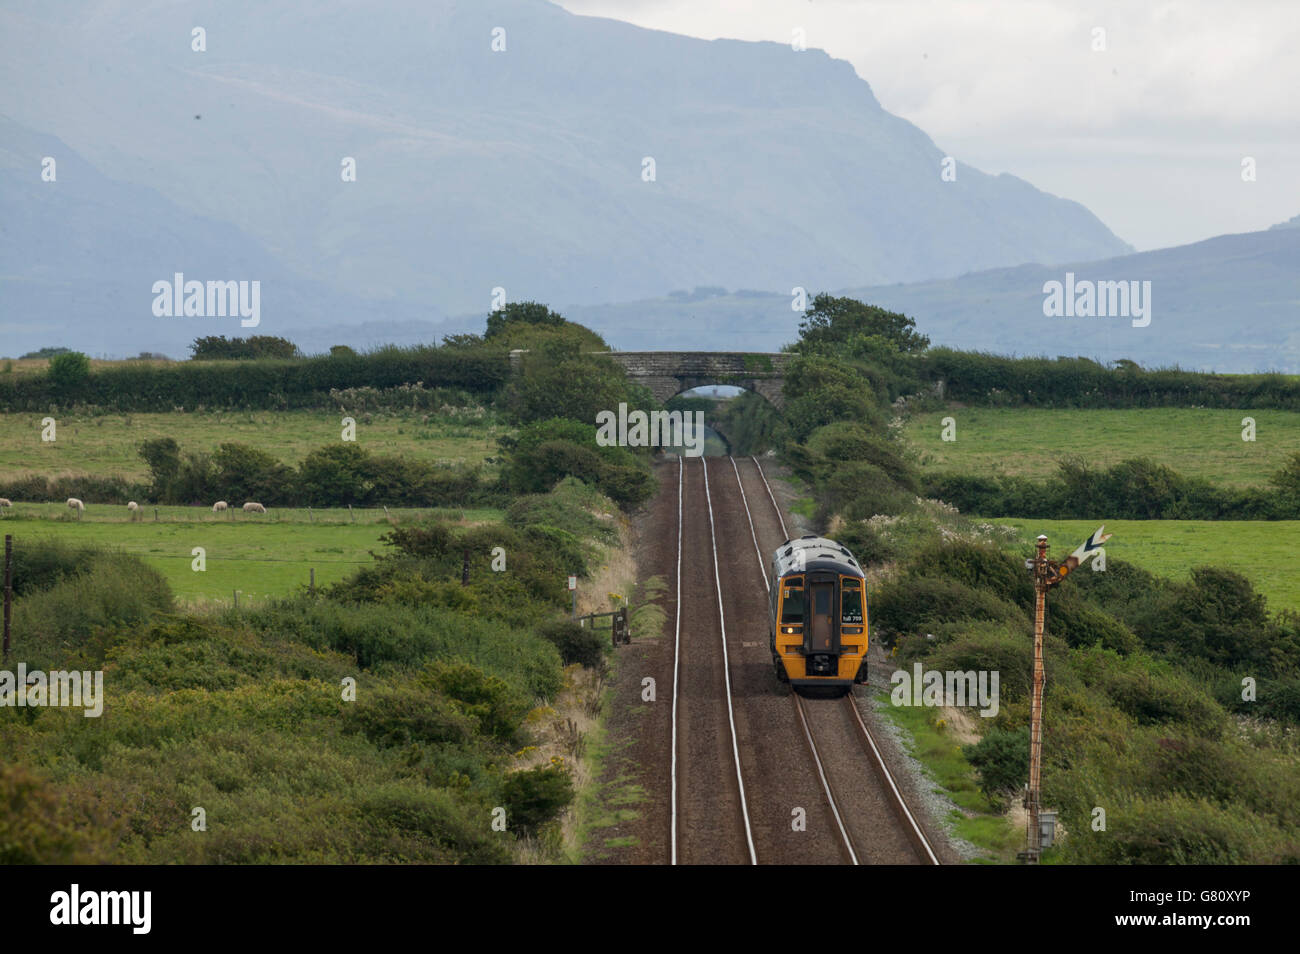 A class 158 DMU heads across Anglesey bound for Holyhead. The mountains of Snowdonia are visible in background. Stock Photo